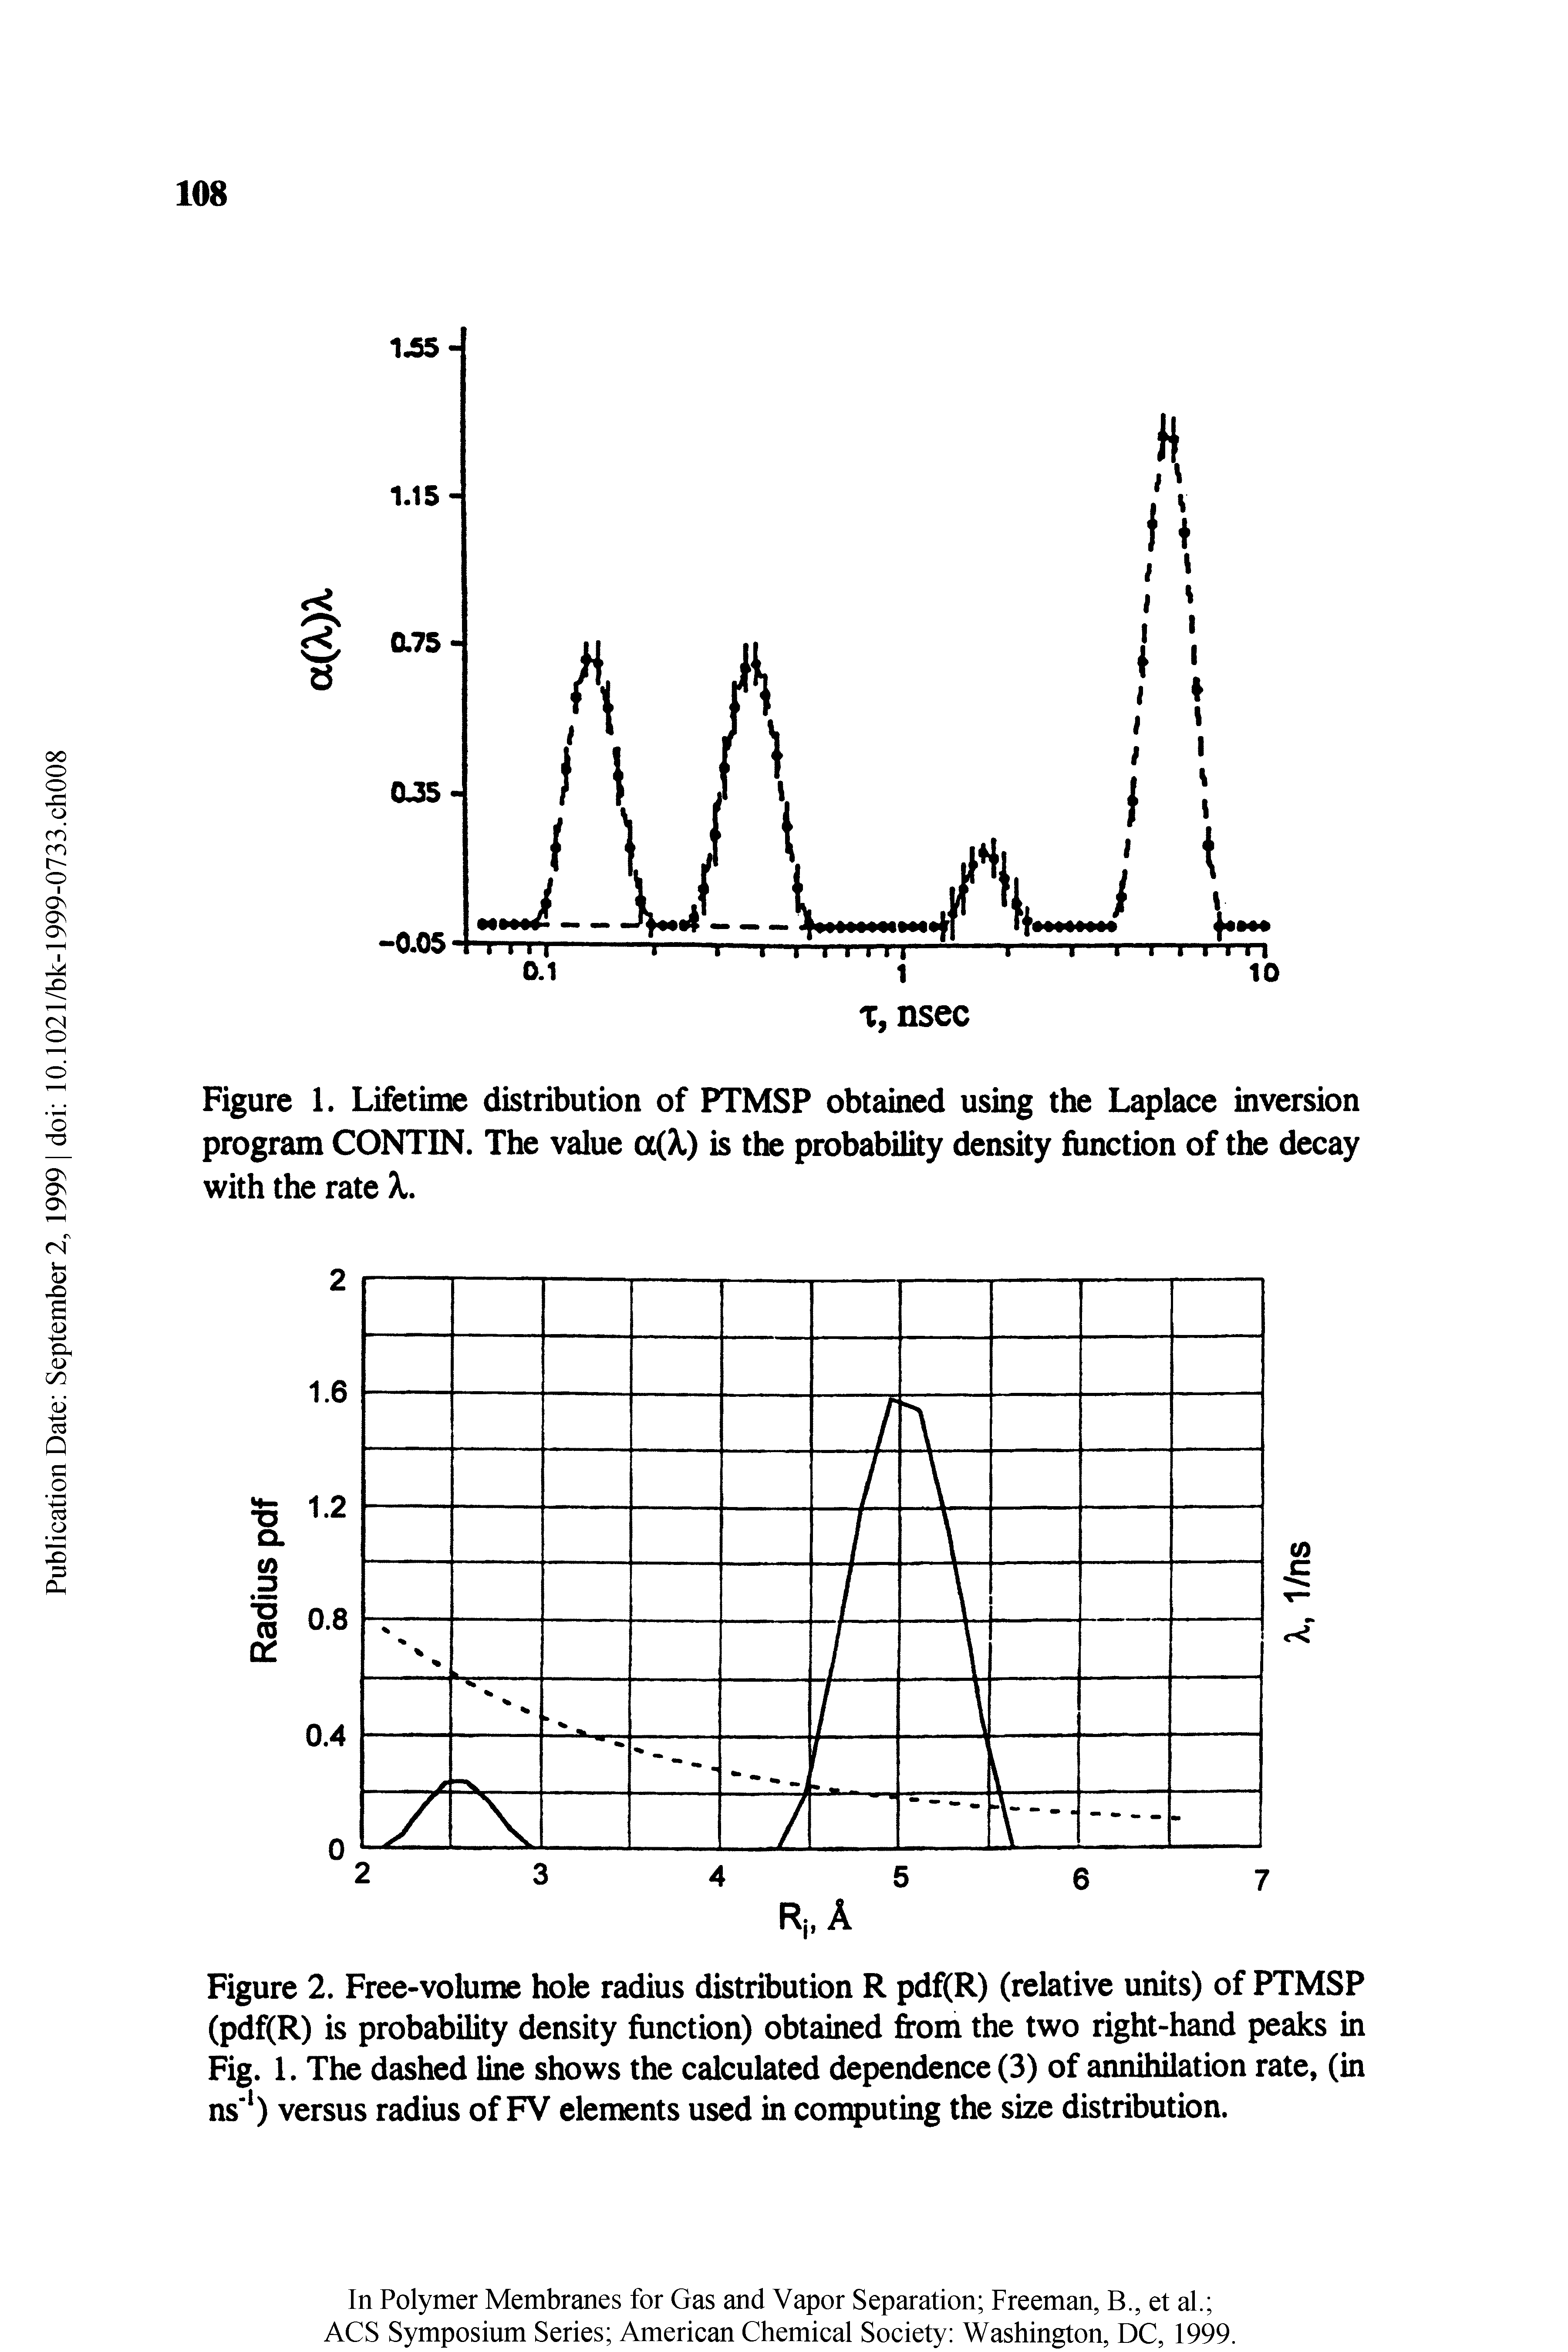 Figure 2. Free-volume hole radius distribution R pdf(R) (relative units) of PTMSP (pdf(R) is probability density function) obtained from the two right-hand peaks in Fig. 1. The dashed line shows the calculated dependence (3) of annihilation rate, (in ns ) versus radius of FV elements used in confuting the size distribution.